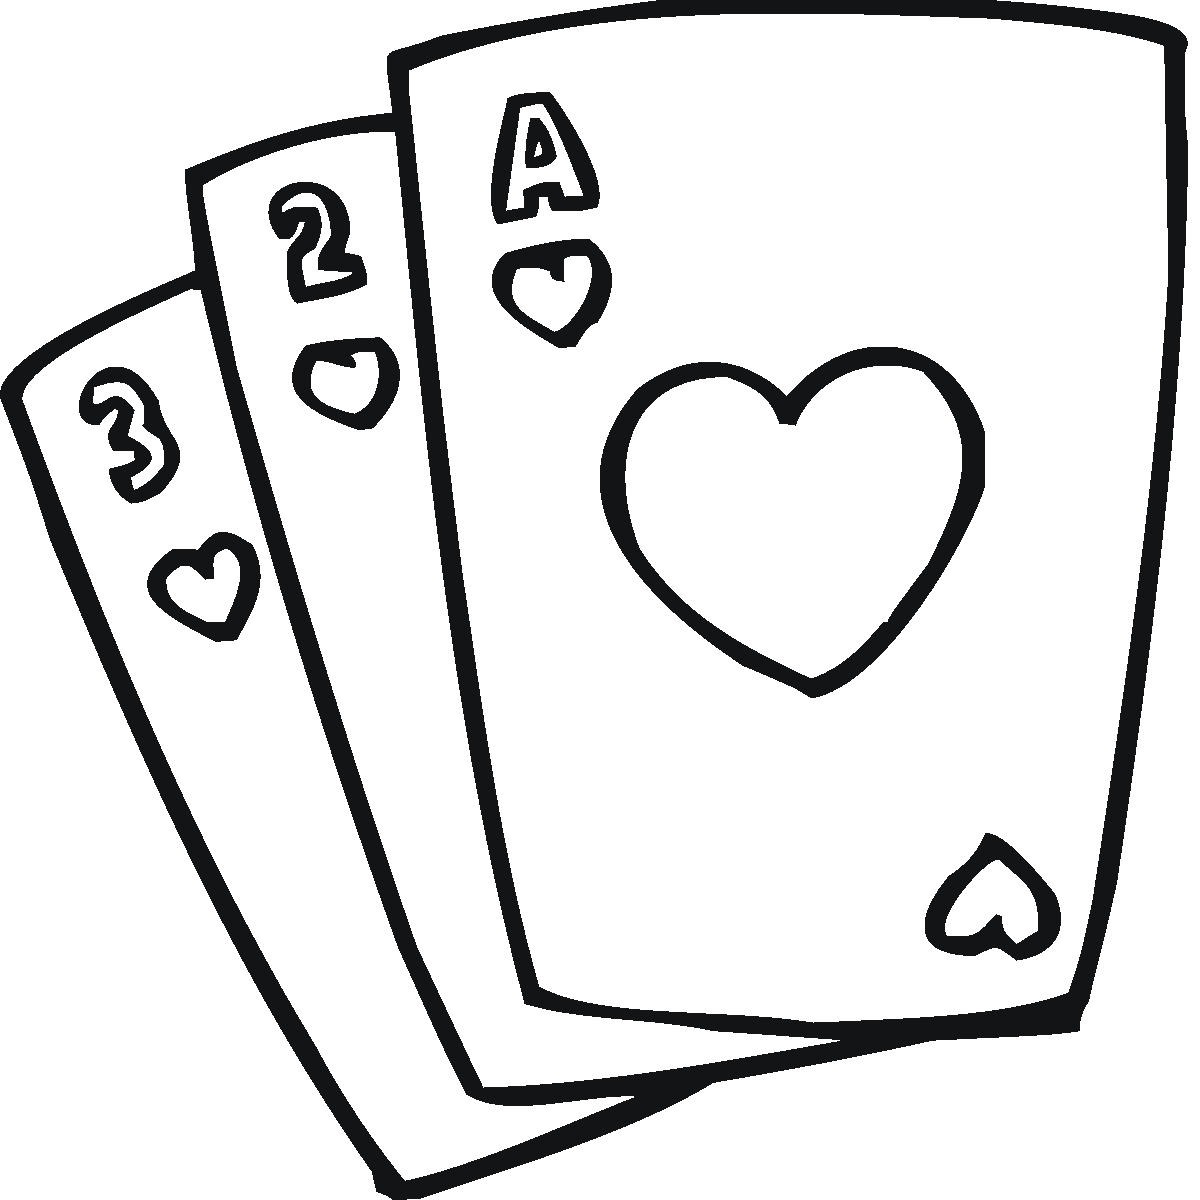 Hand of playing cards clipart